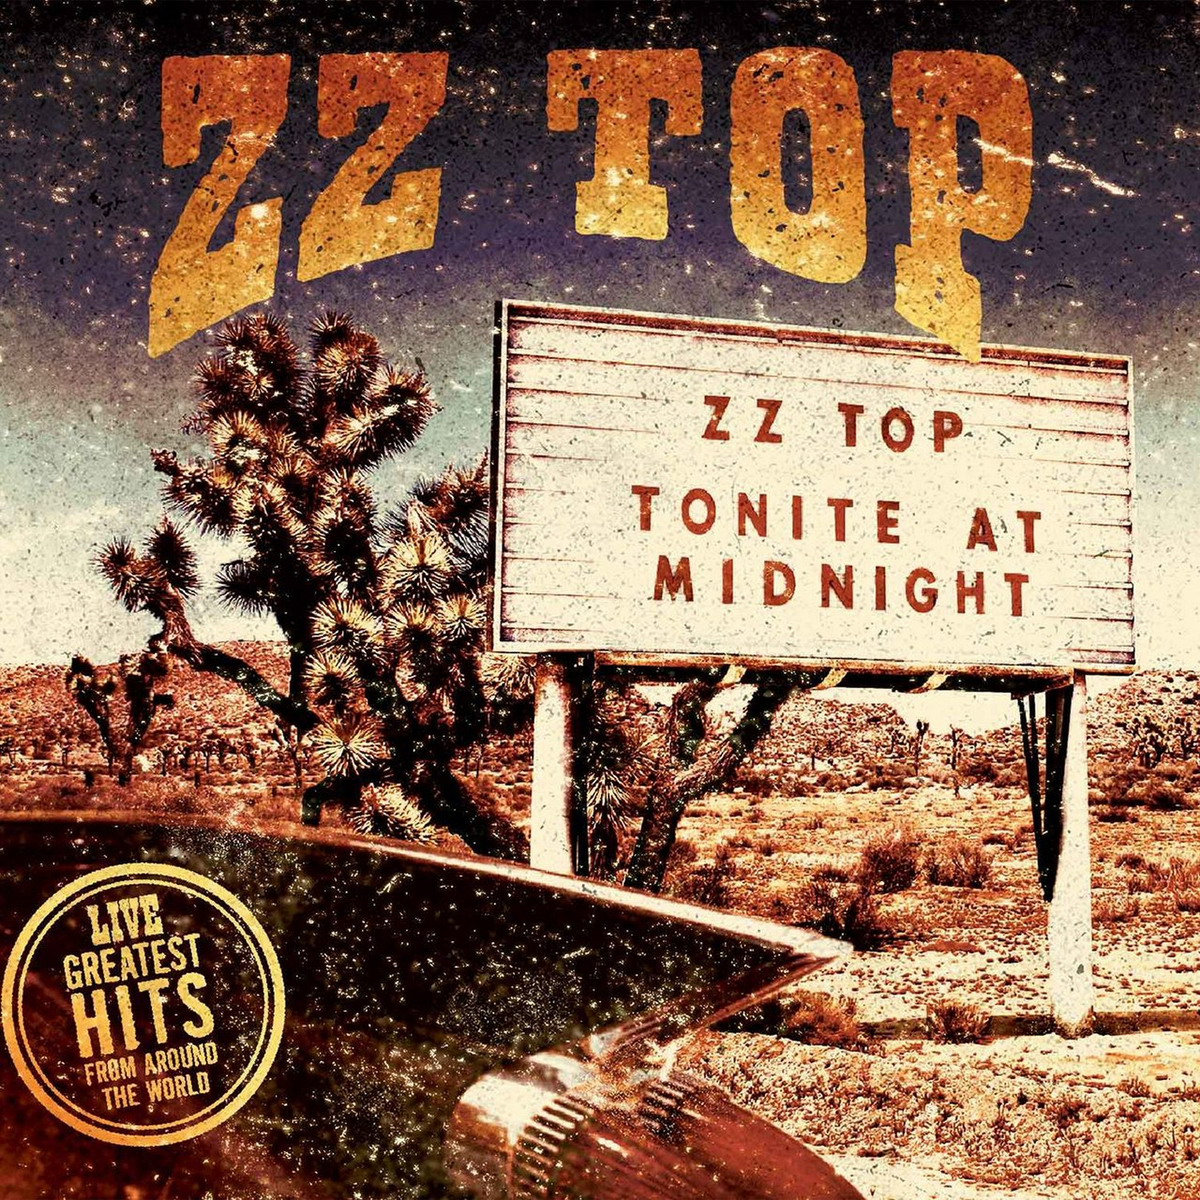 ZZ Top - Live: Greatest Hits From Around The World (2016) [HDTracks FLAC 24bit/48kHz]